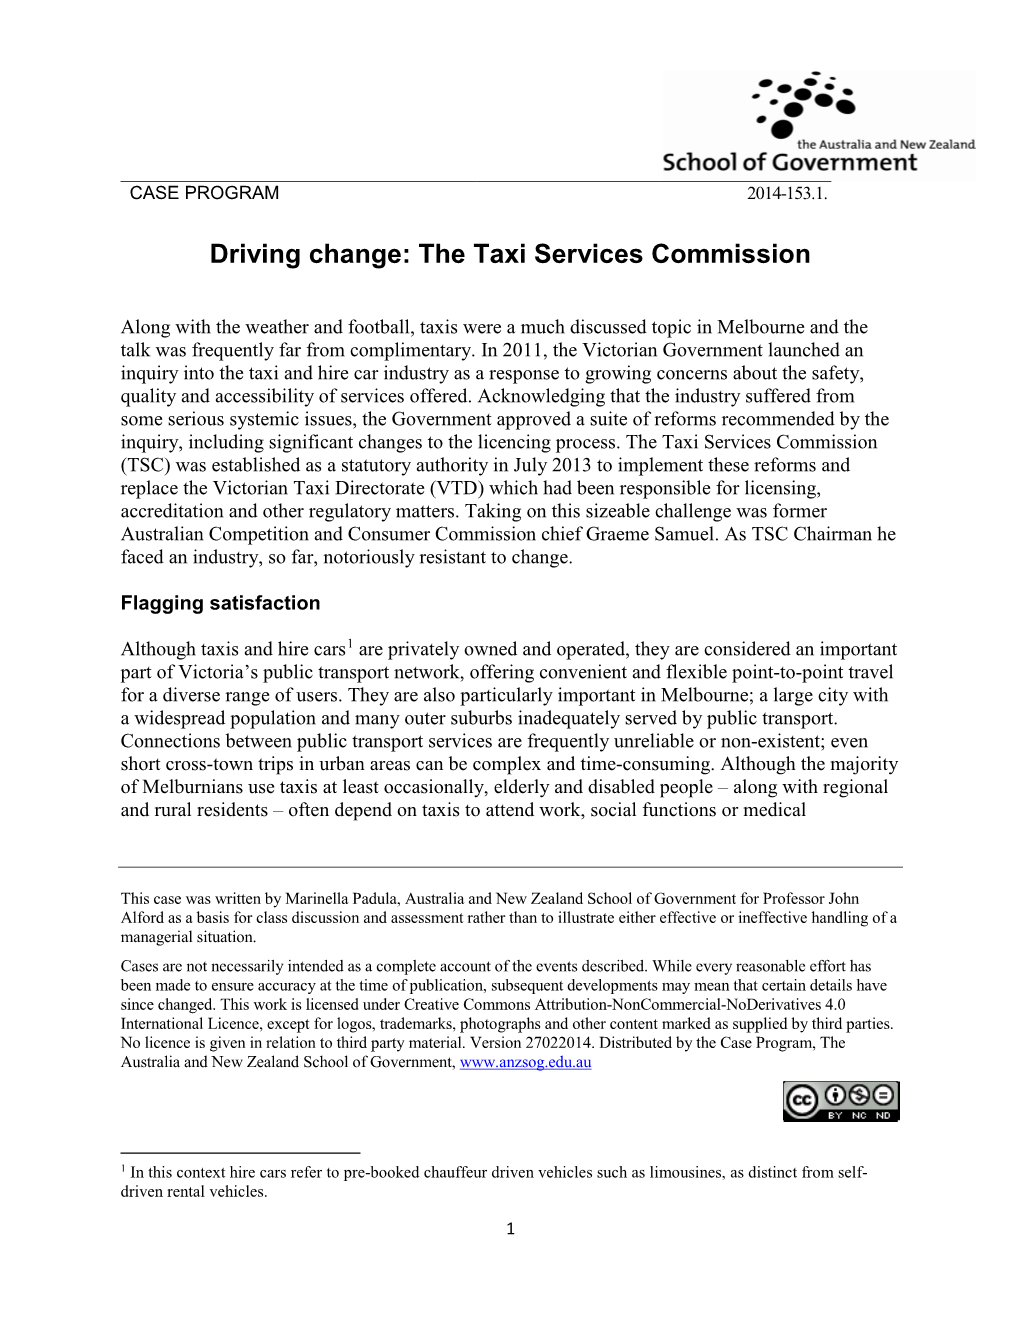 Driving Change: the Taxi Services Commission